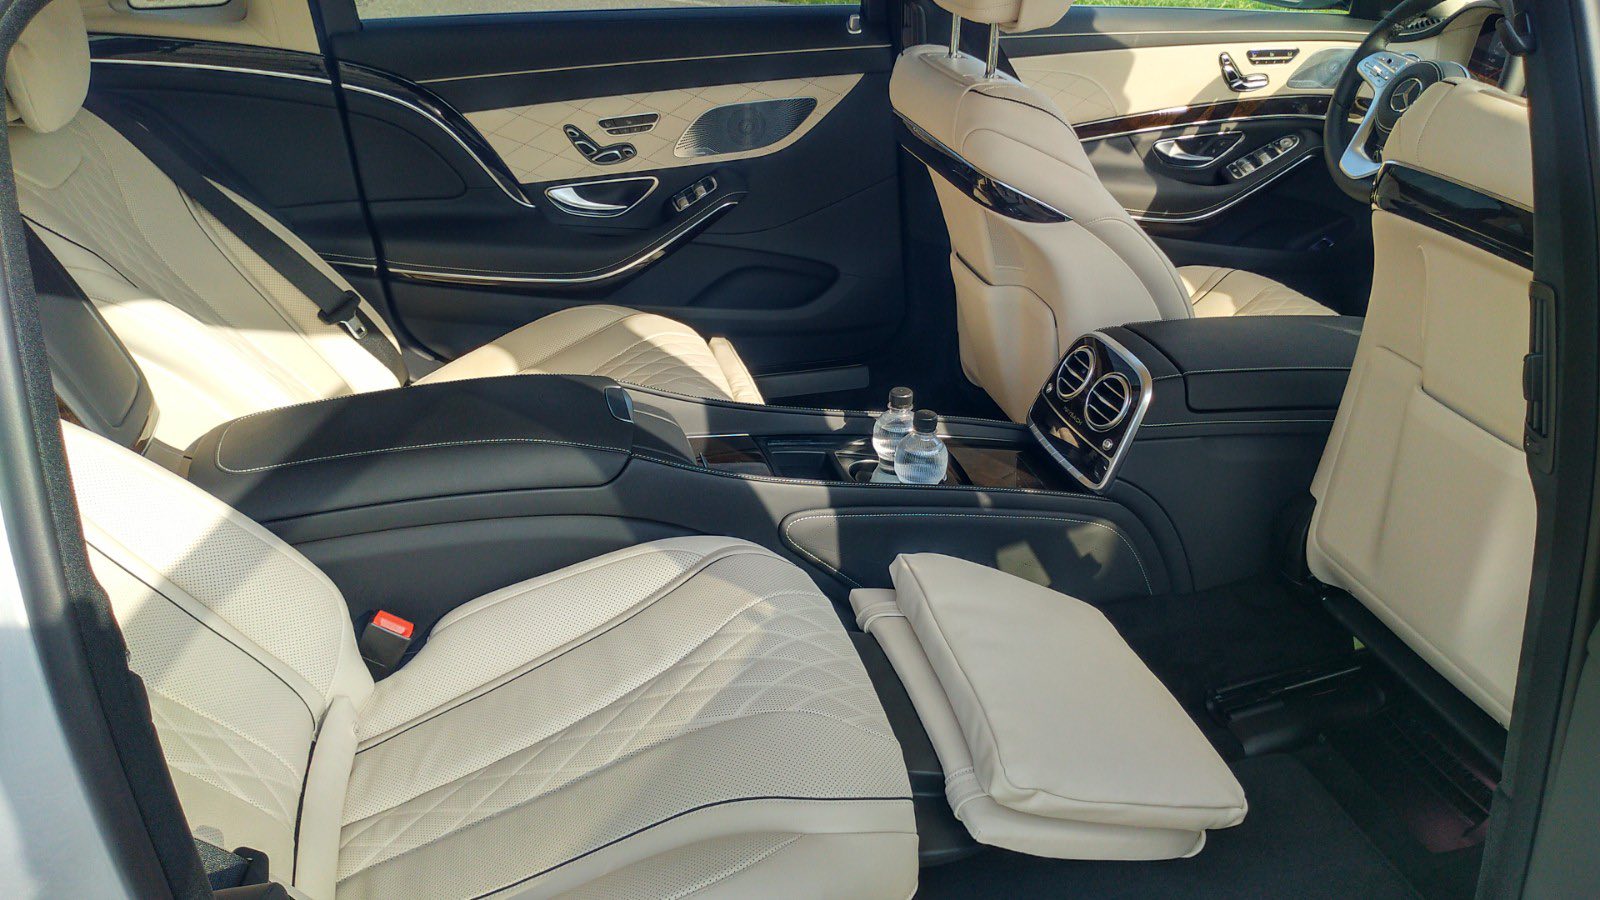 MERCEDES-BENZ S560 Maybach 4Matic (for 3 passengers)